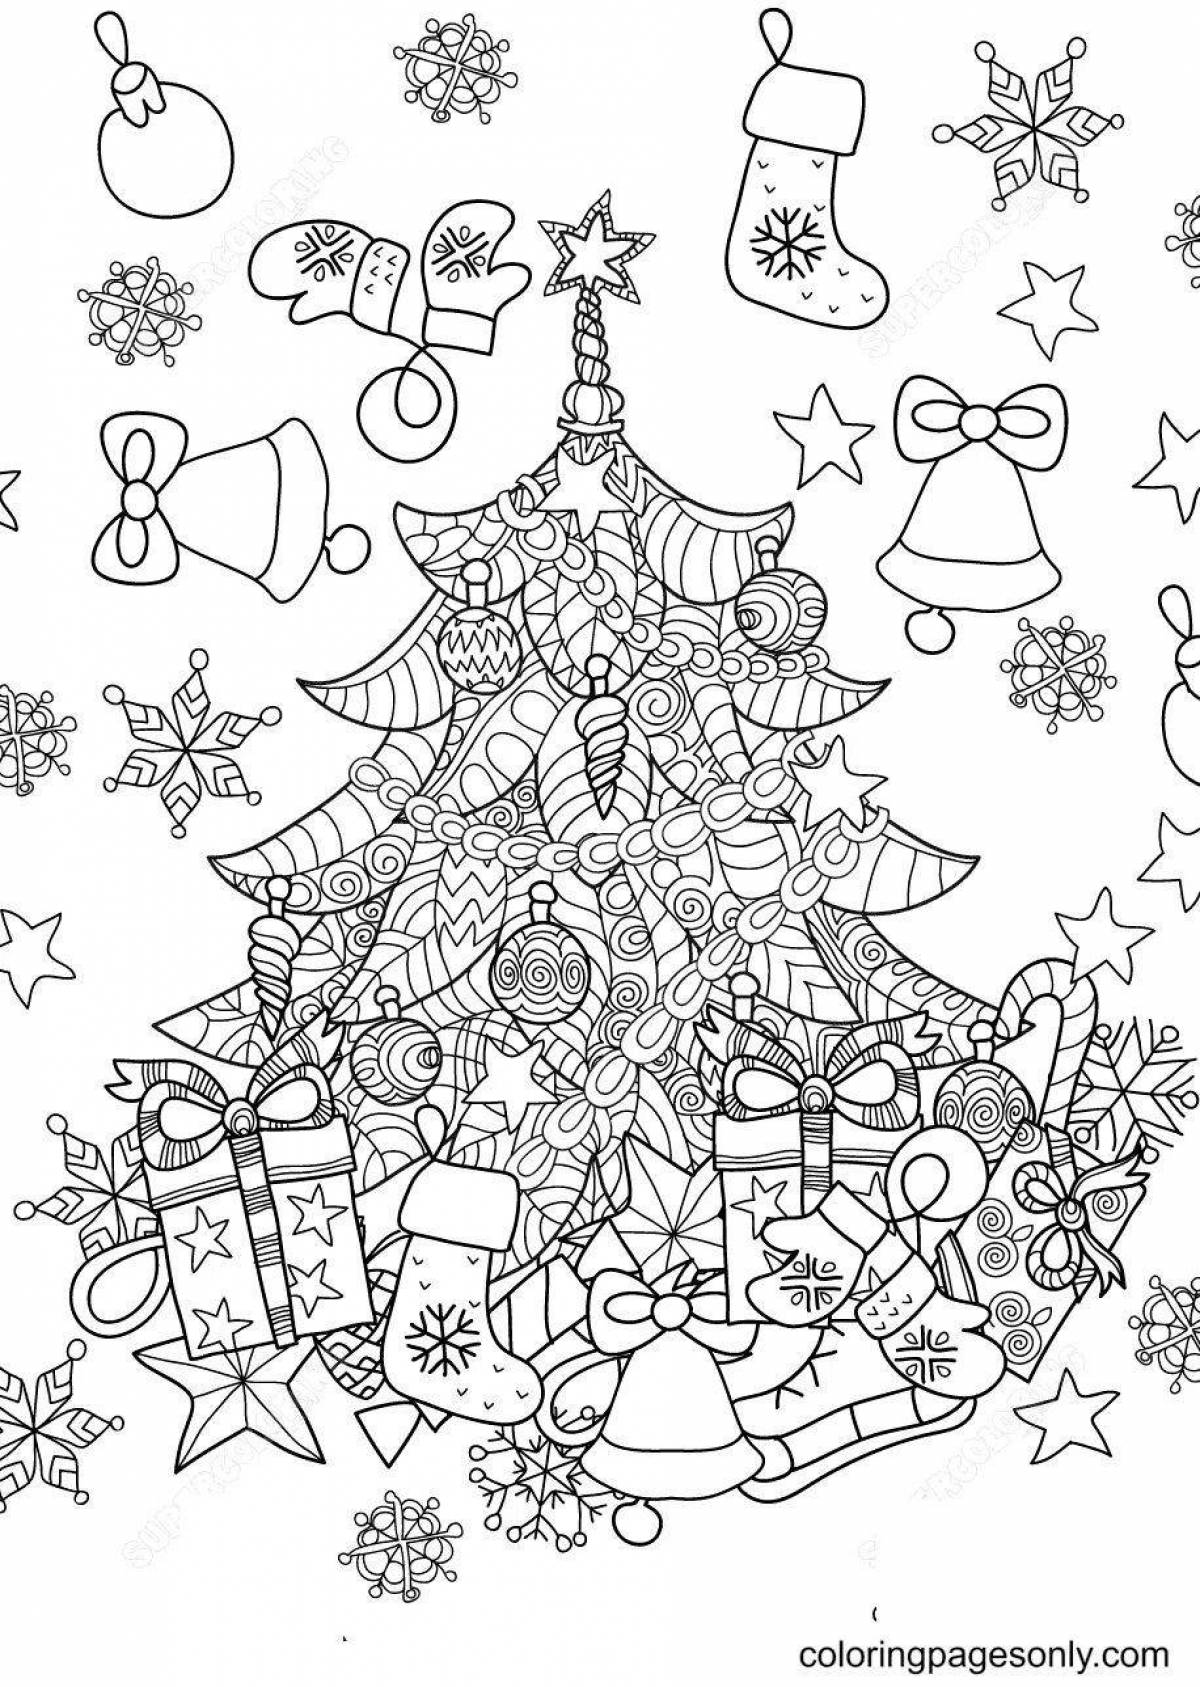 Delightful Christmas coloring book